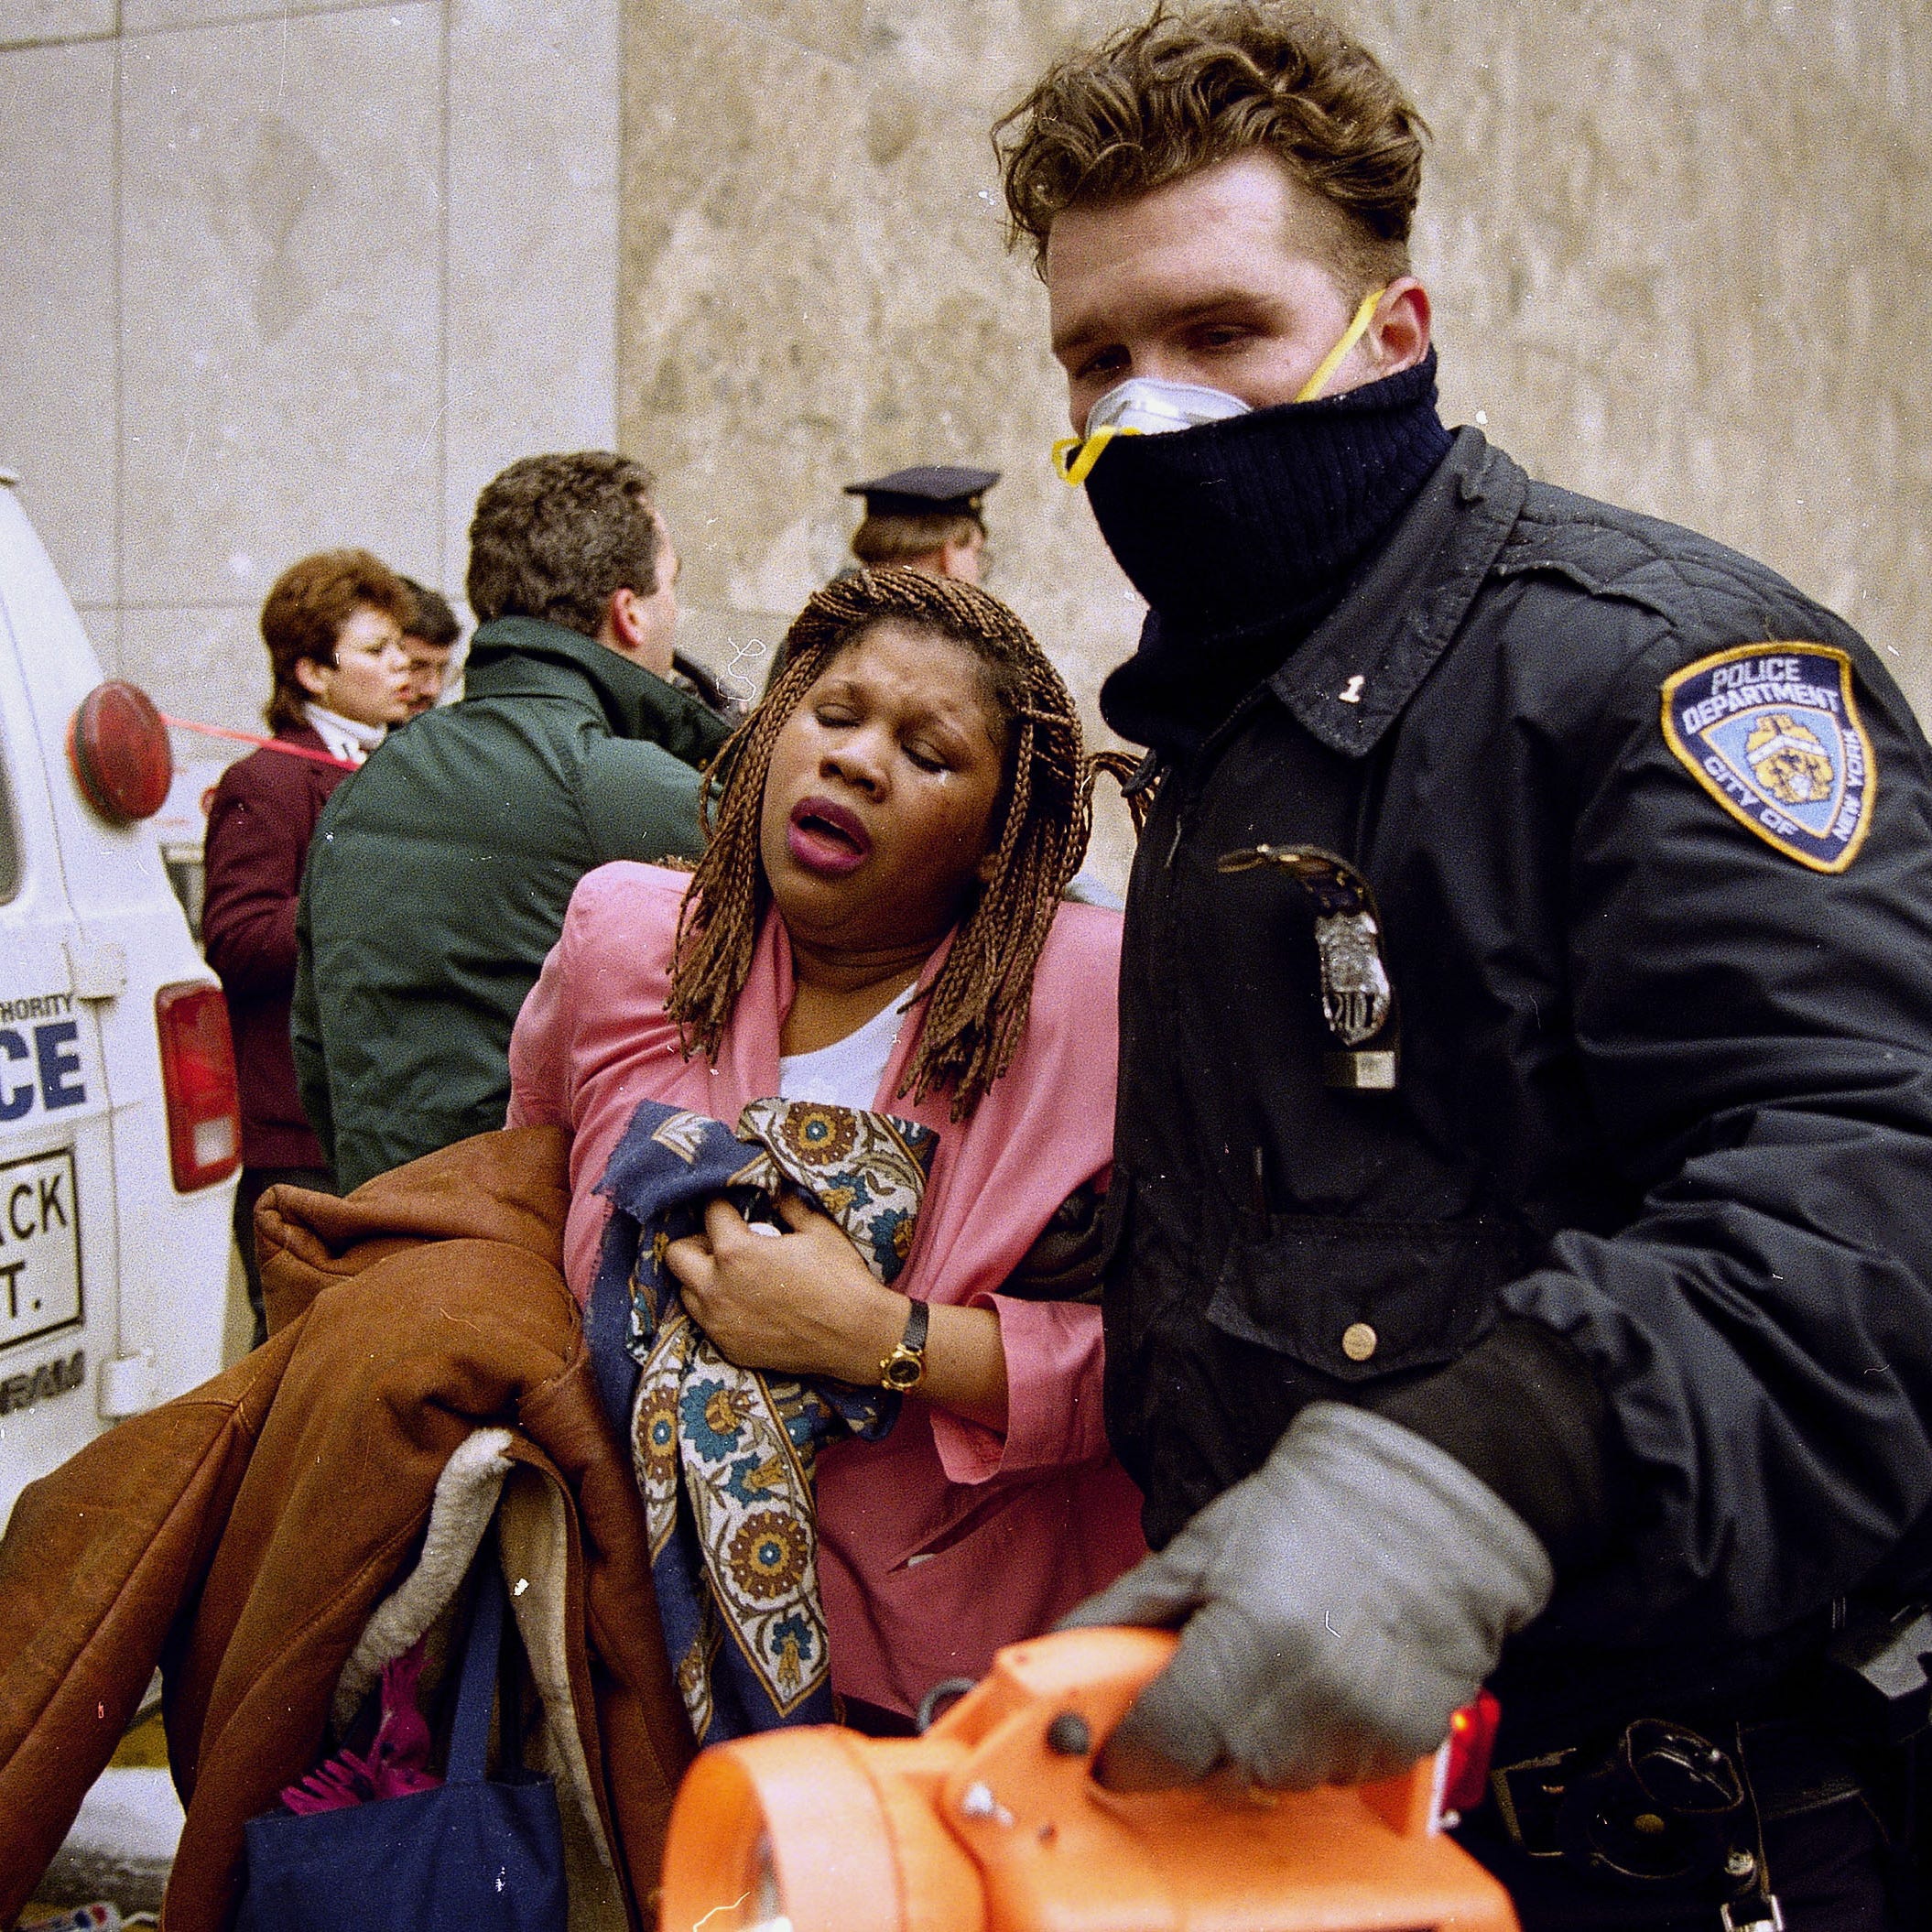 In this file photo of Feb. 26, 1993, a New York City police officer leads a woman to safety following the underground bomb blast of a rented van loaded with fertilizer at the World Trade Center. The first attack on the towers killed six people and injured more than 1,000.   There have been at least nine planned terror attacks in the city since the Sept. 11, 2001 attacks, but more often than not, terrorist plots have failed. On Saturday, May 1, 2010, a smoking SUV in Times Square was discovered before the explosives inside   could do any damage, but for New Yorkers, the question always remains: What about next time?